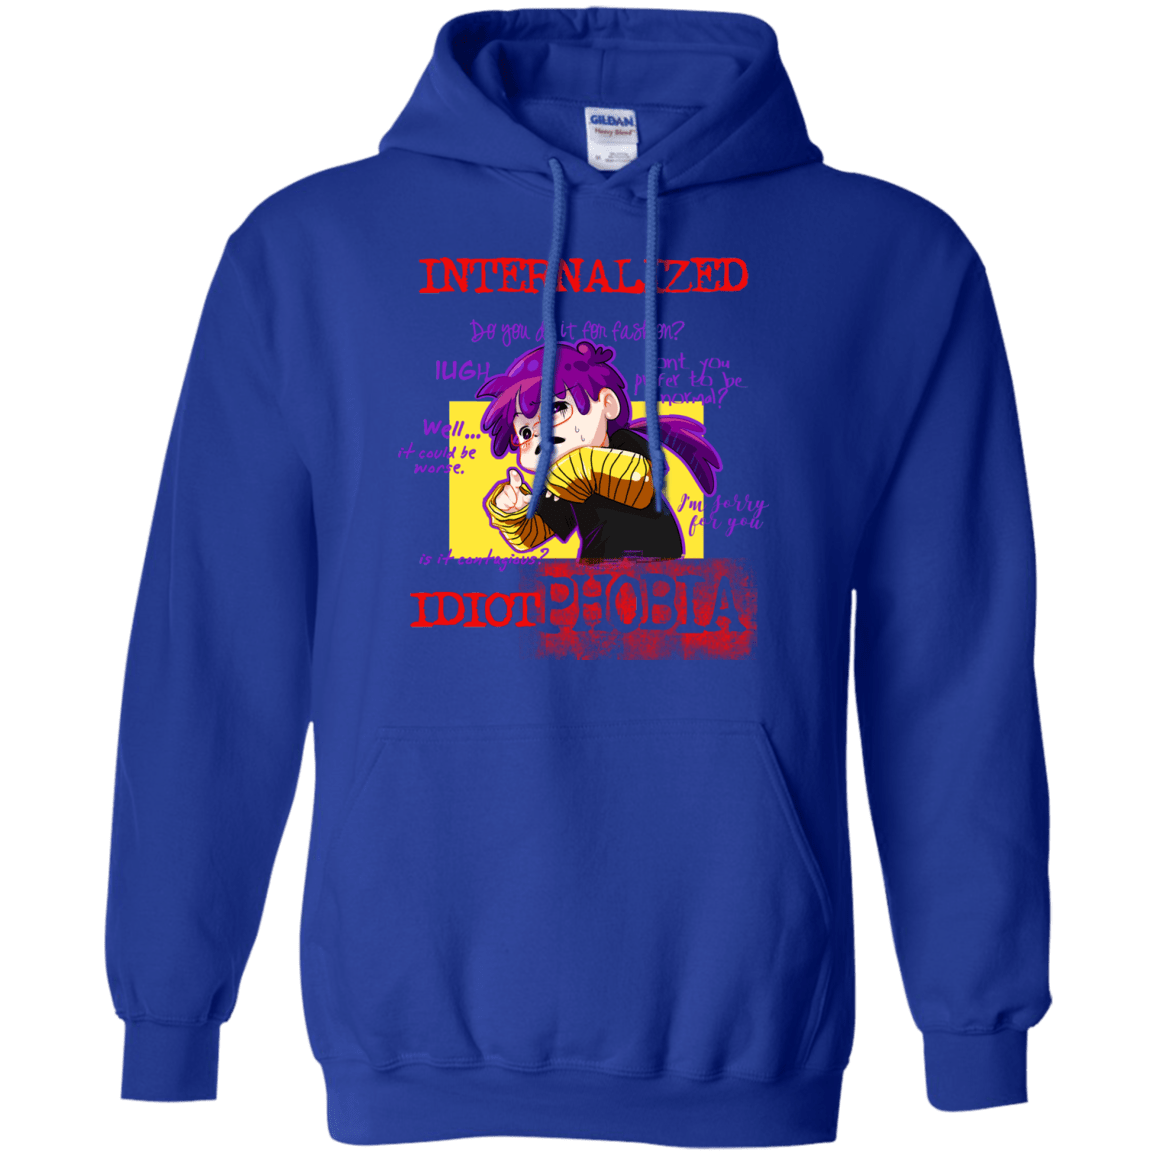 Idiot phobia Pullover Hoodie